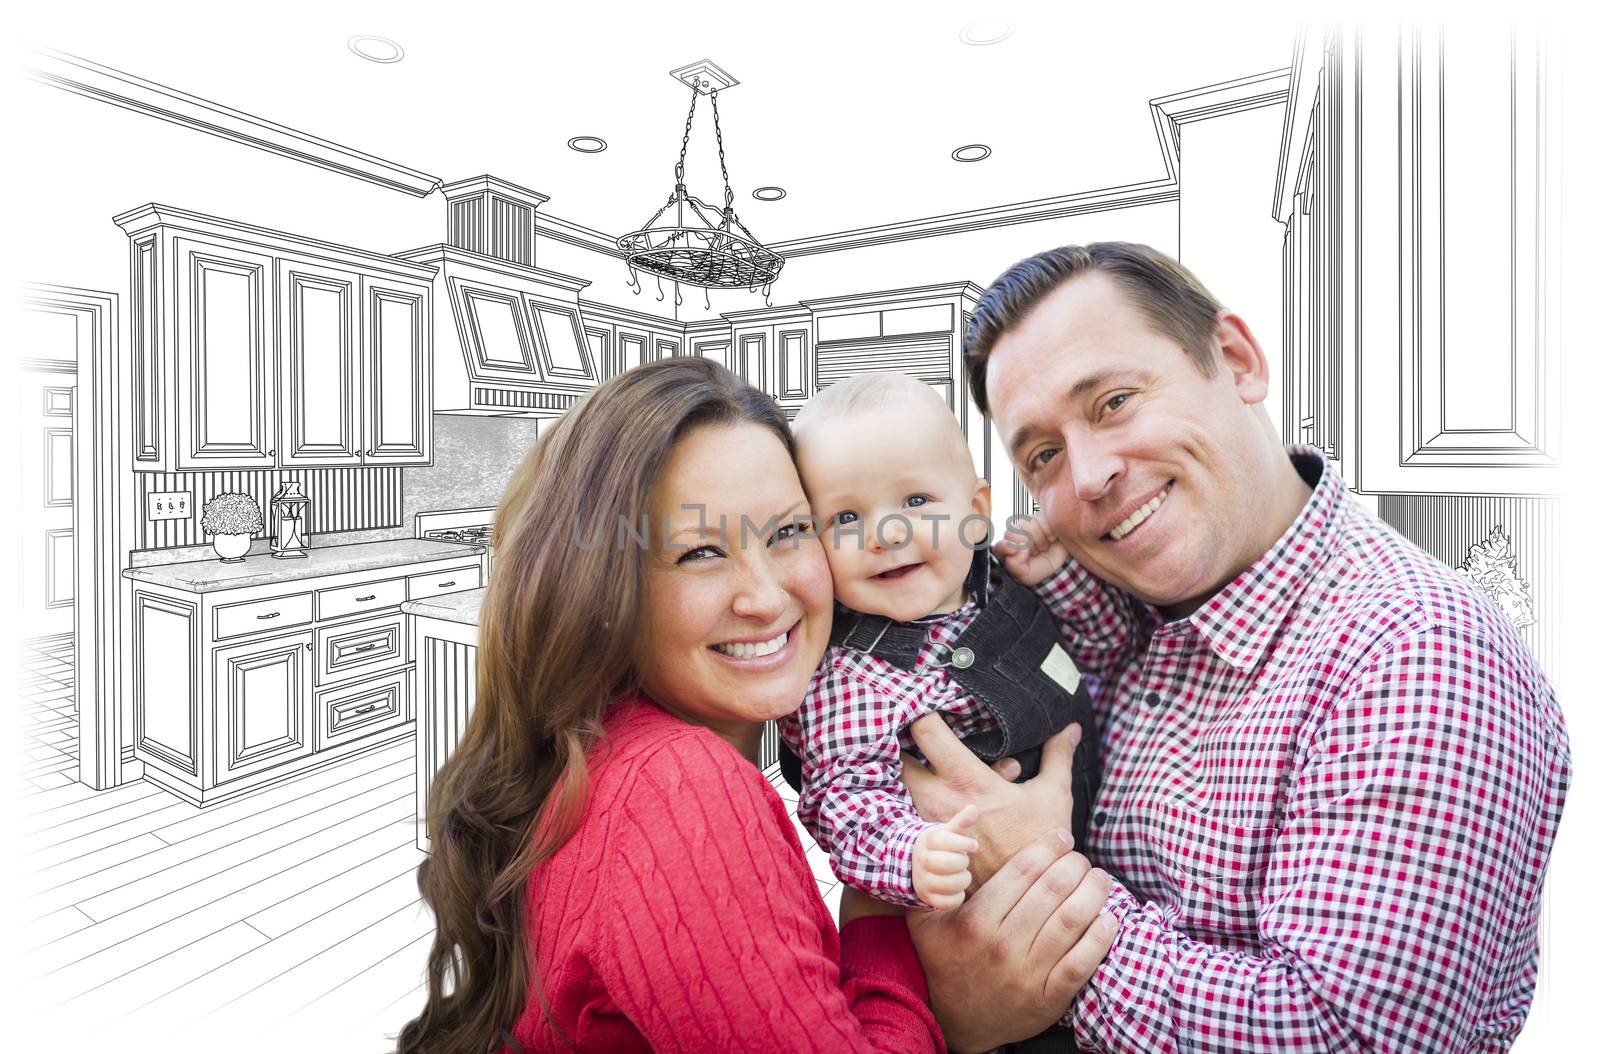 Young Family Over Custom Kitchen and Design Drawing  by Feverpitched